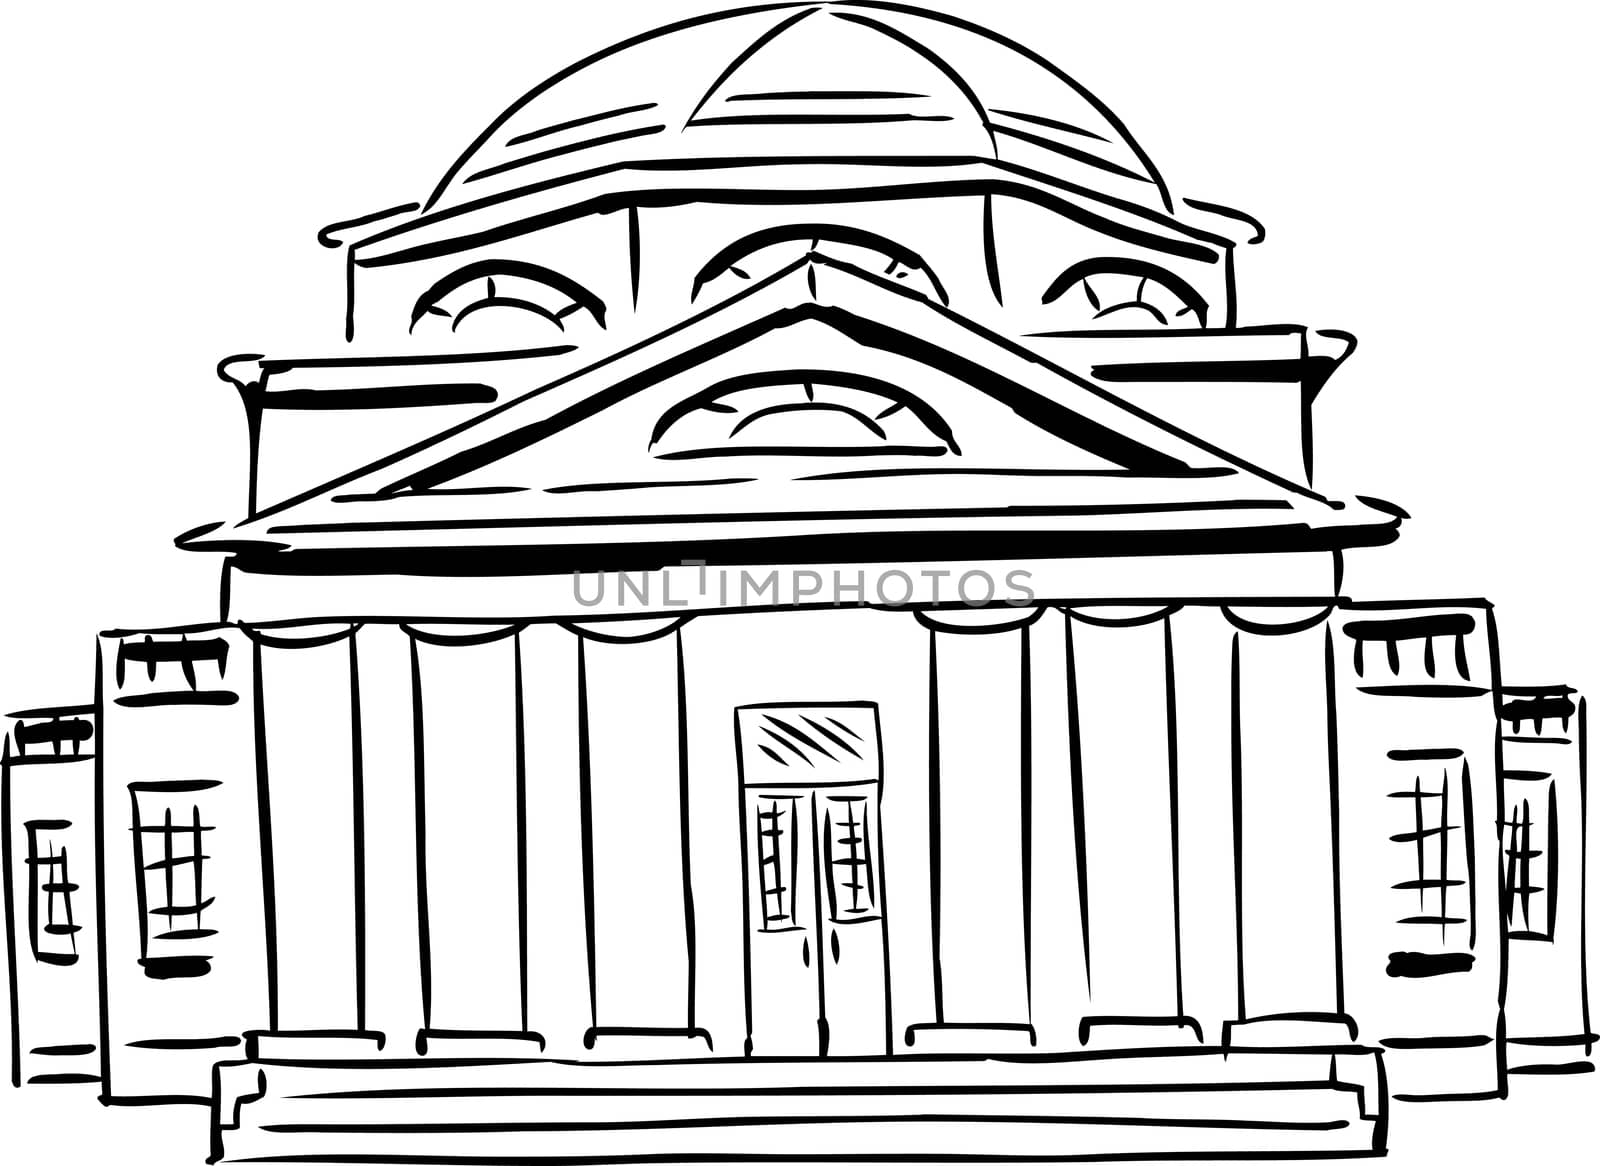 Outlined front view on single church with six tuscan style columns and domical roof